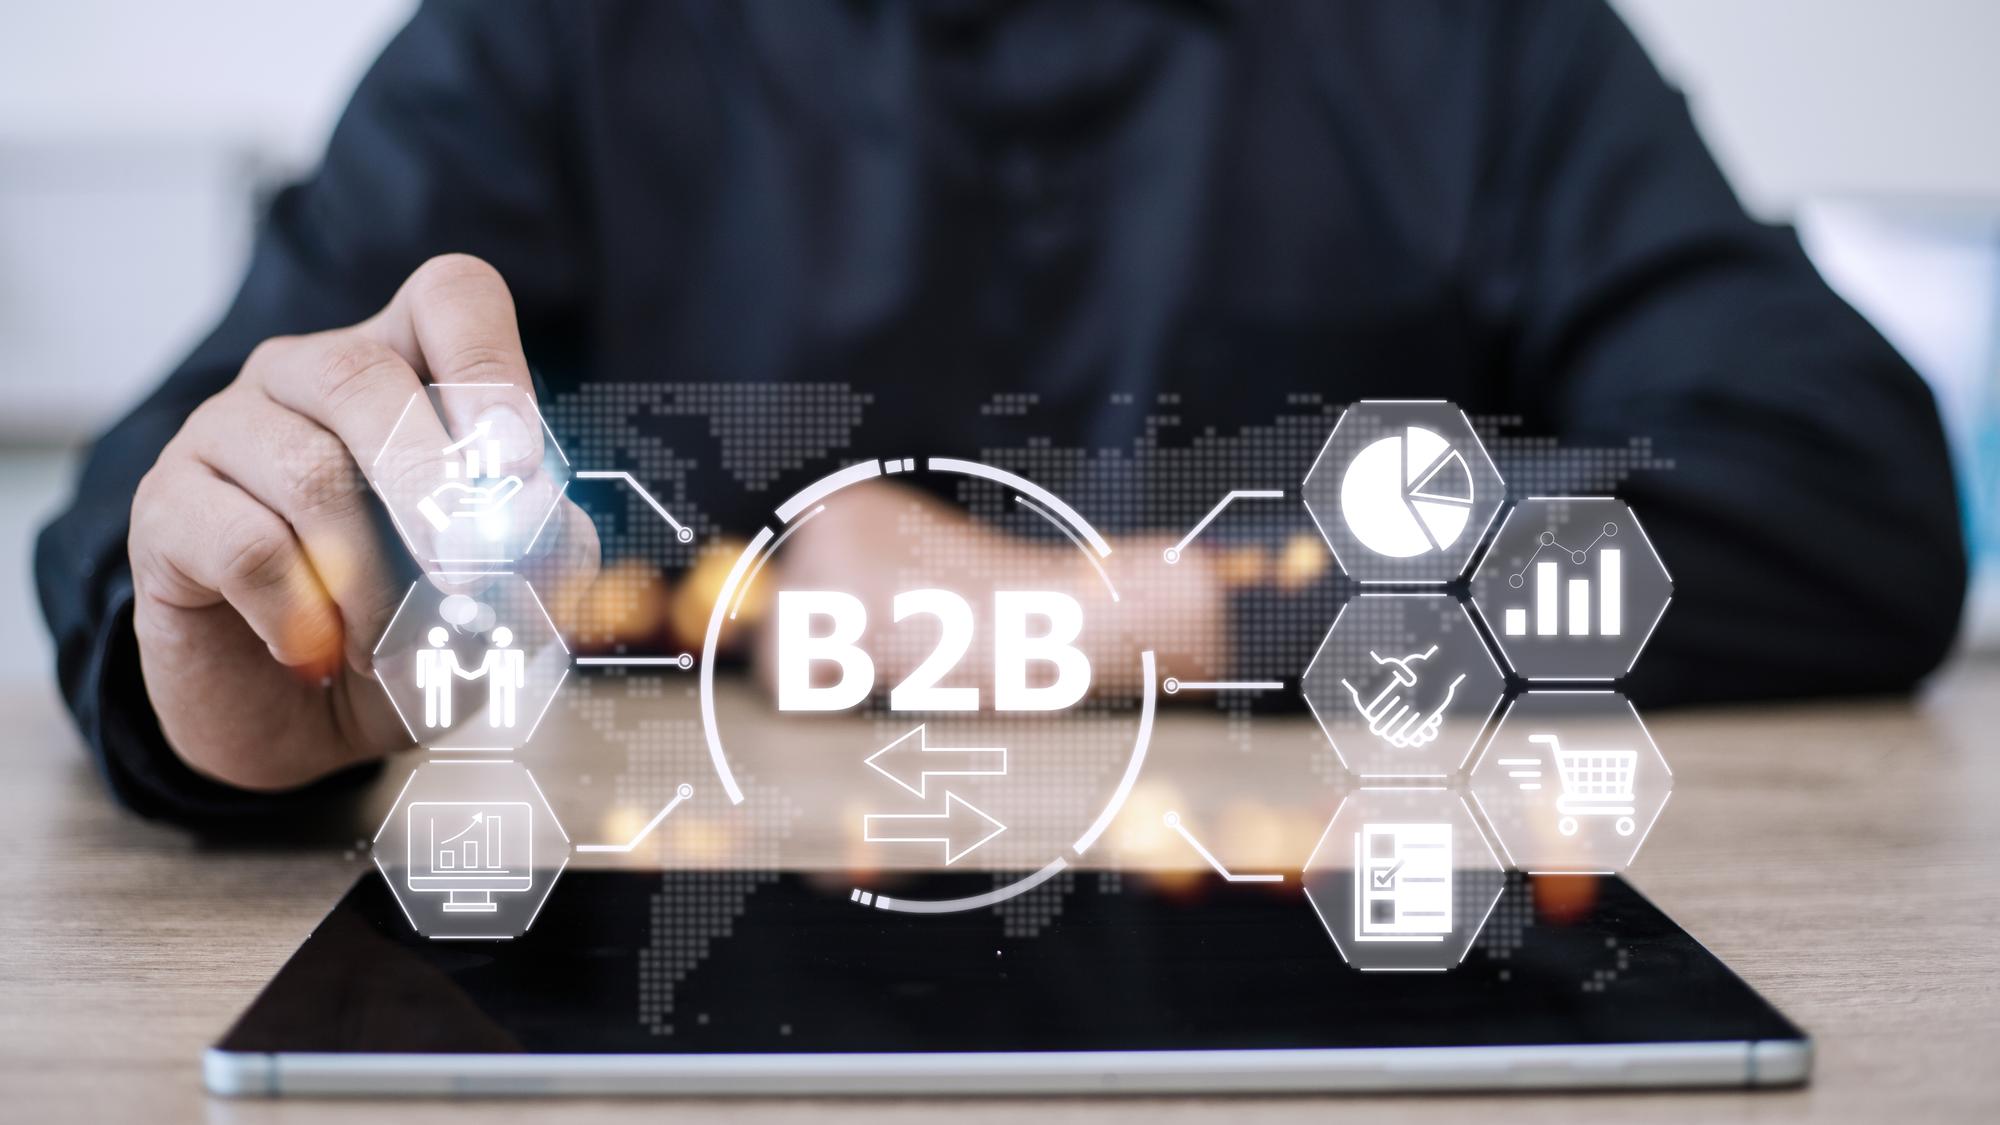  B2B  Business to Business